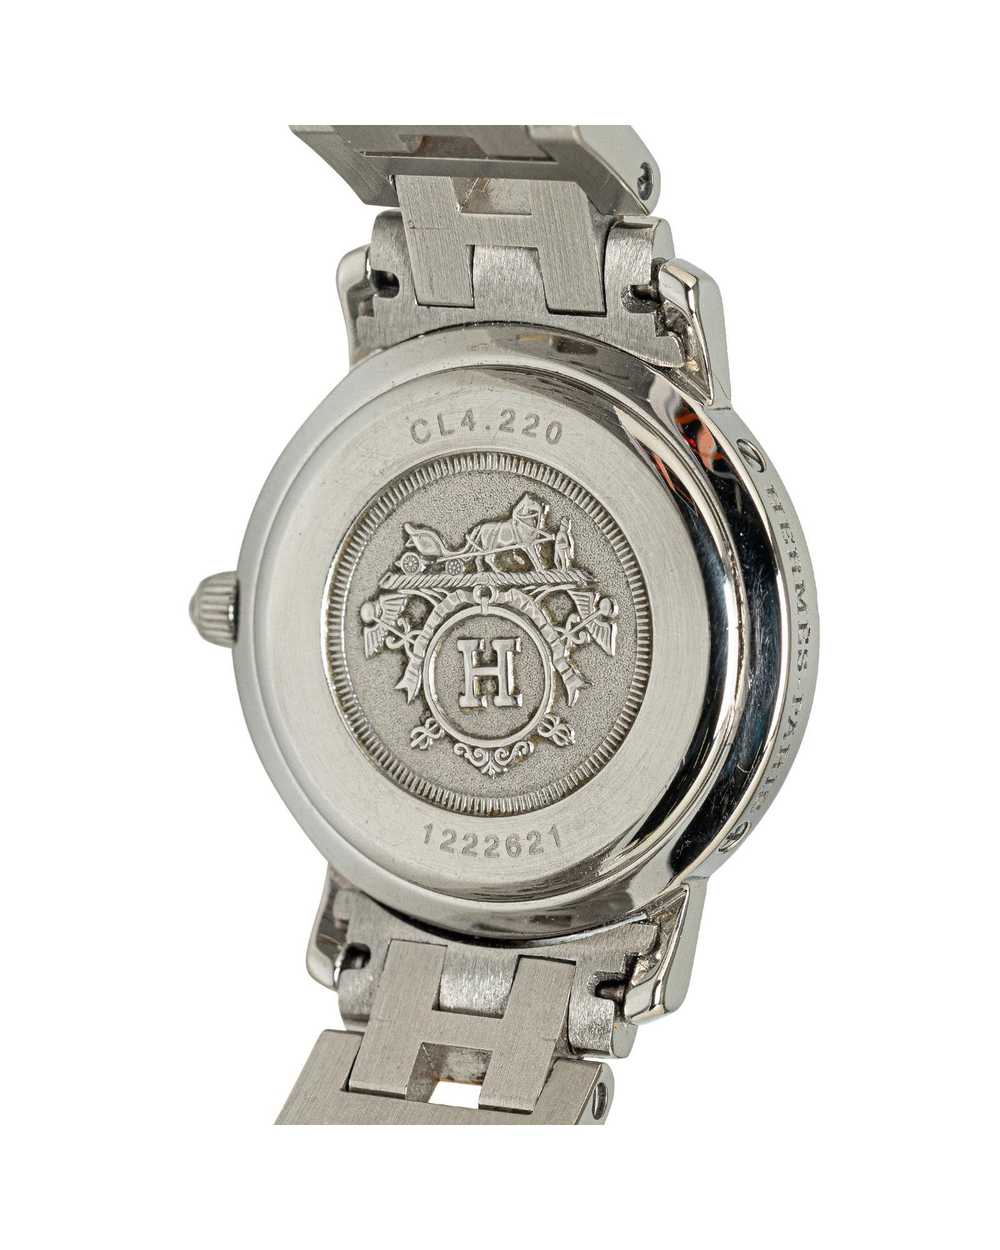 Hermes Stainless Steel Quartz Clipper Watch - image 5